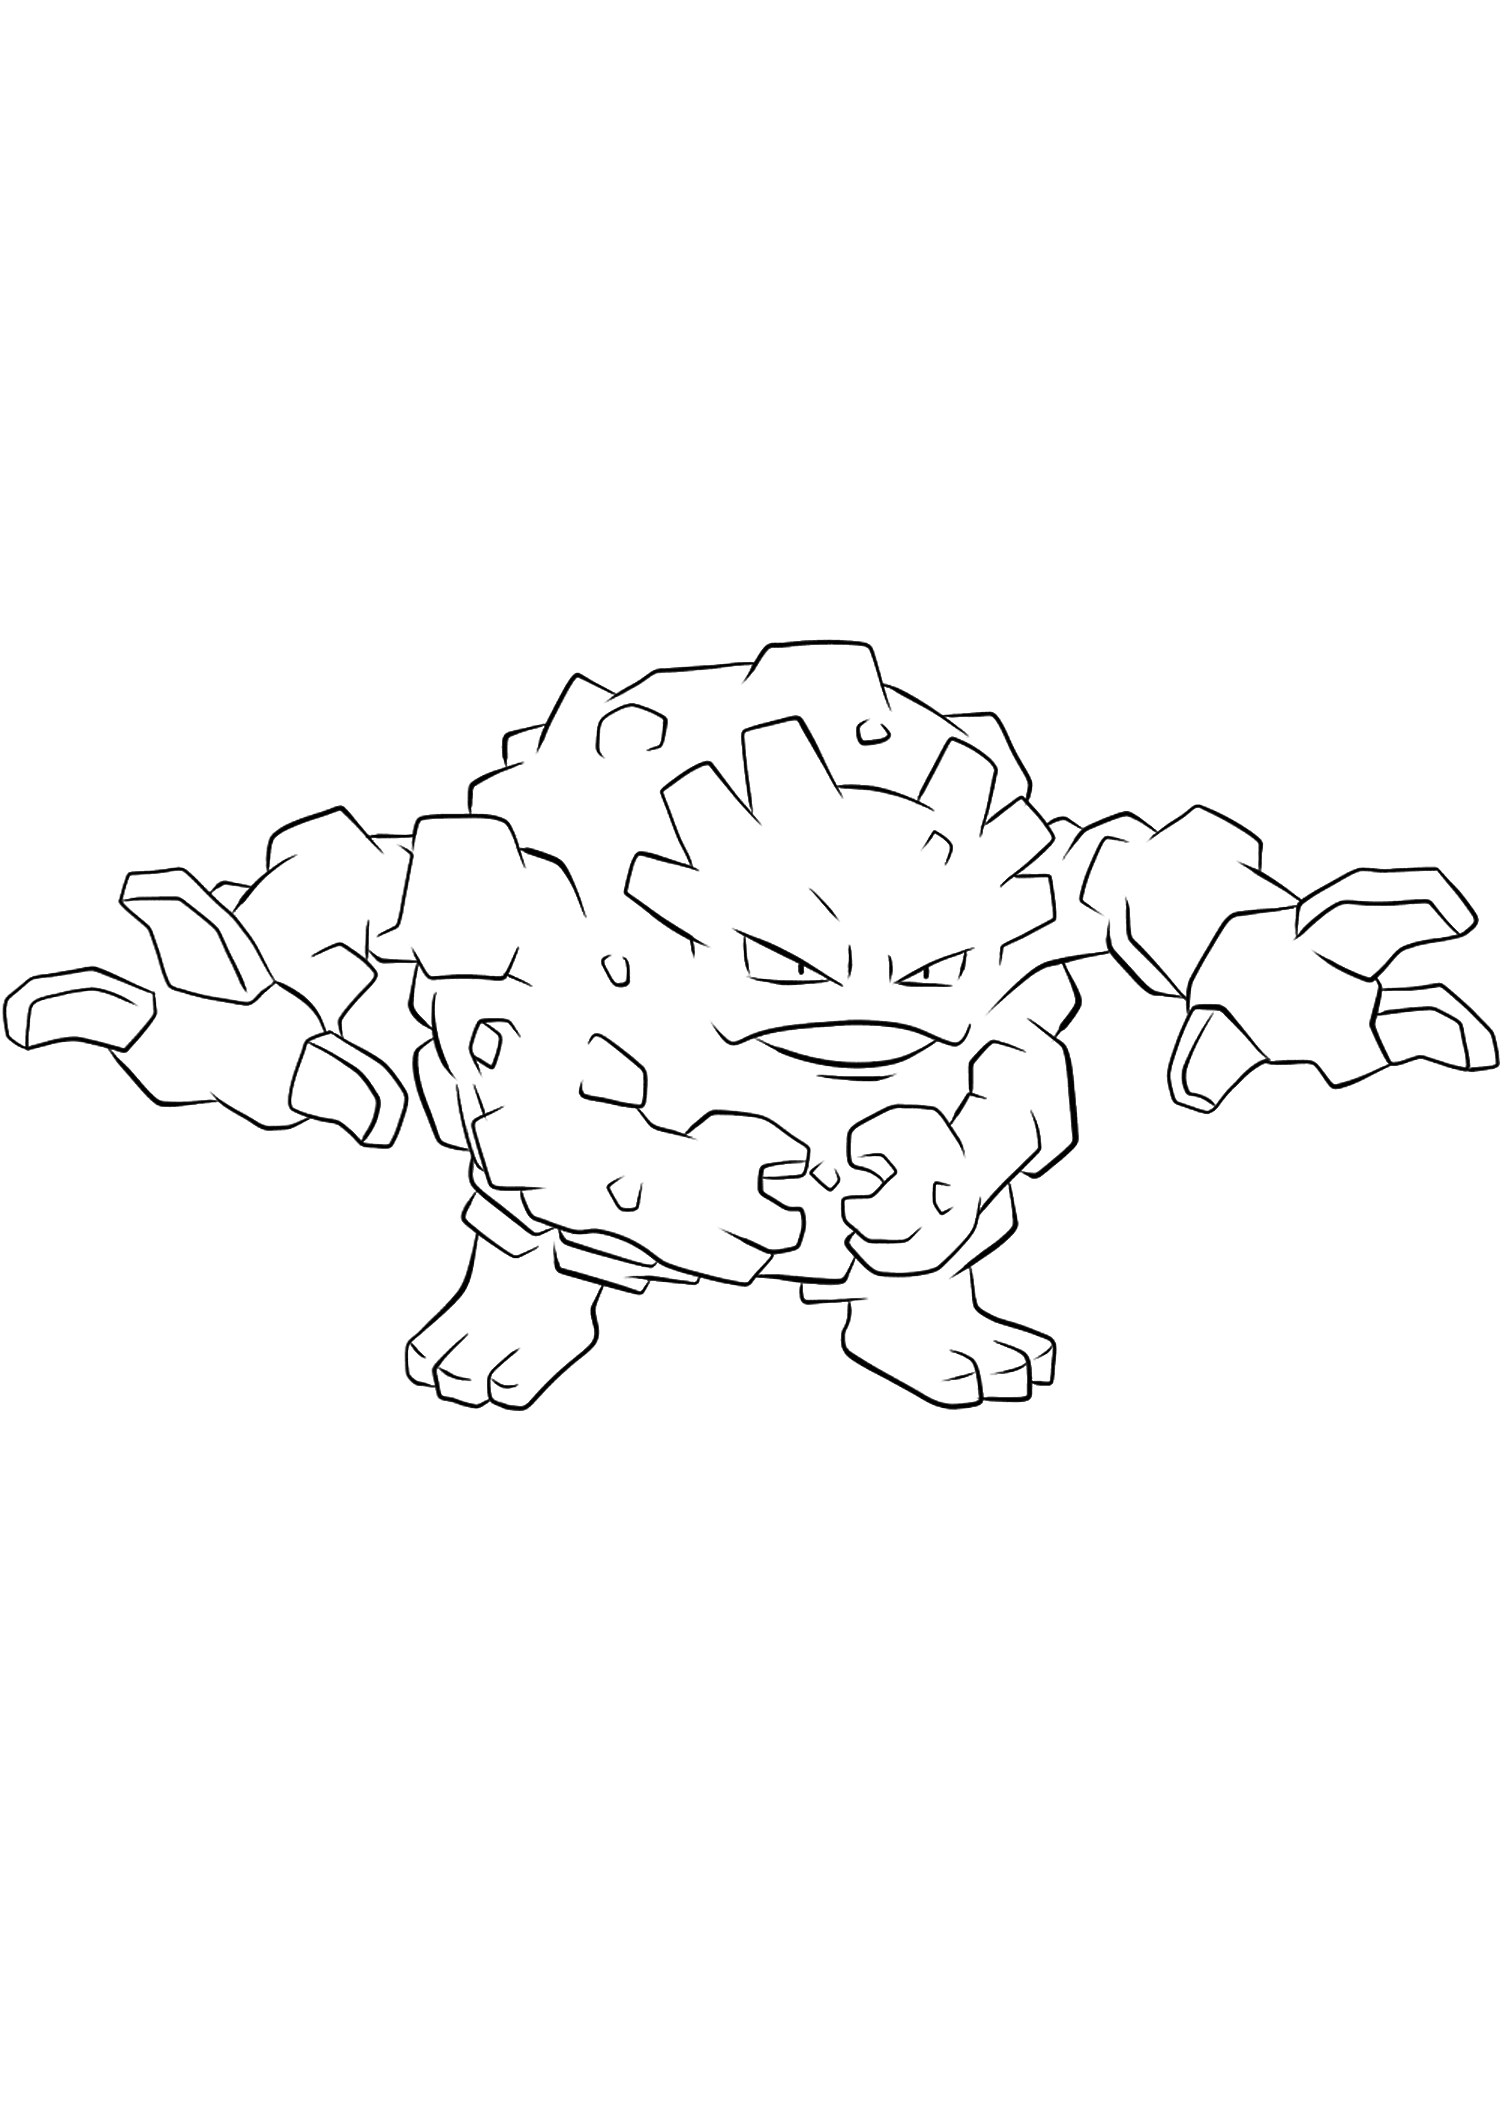 Graveler (No.75). Graveler Coloring page, Generation I Pokemon of type Rock and ElectrikOriginal image credit: Pokemon linearts by Lilly Gerbil on Deviantart.Permission:  All rights reserved © Pokemon company and Ken Sugimori.